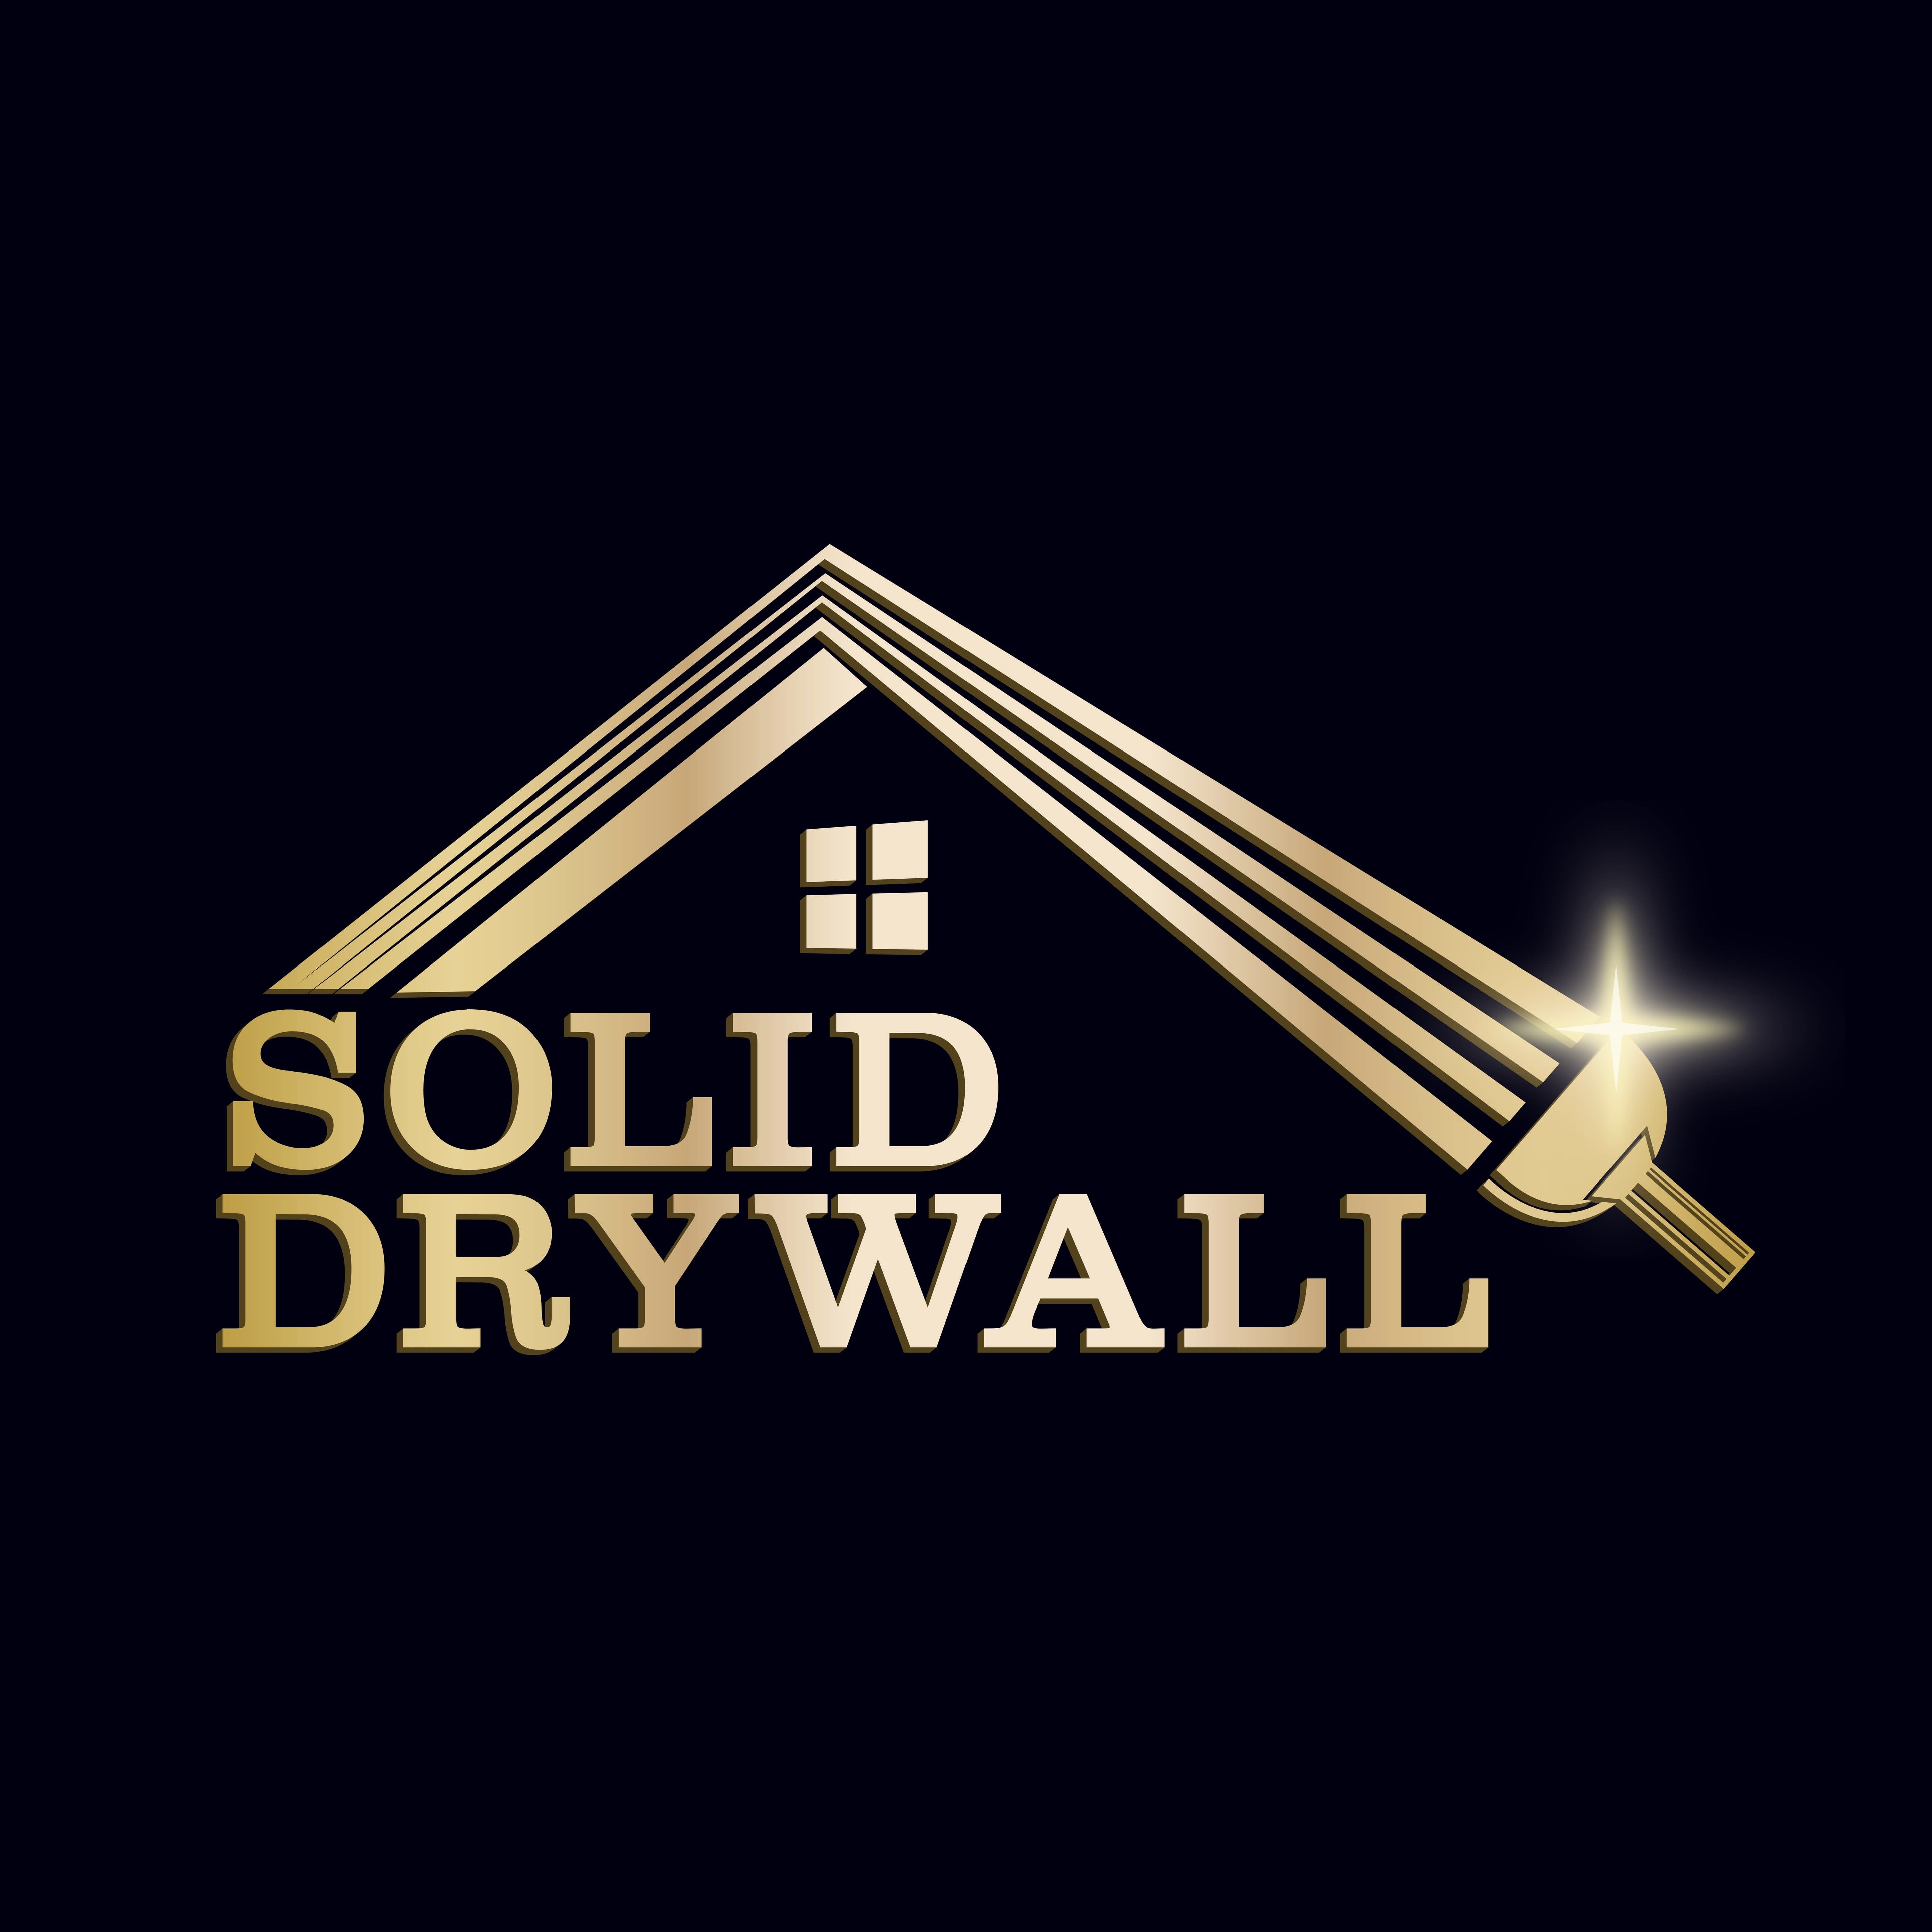 Solid Drywall's logo